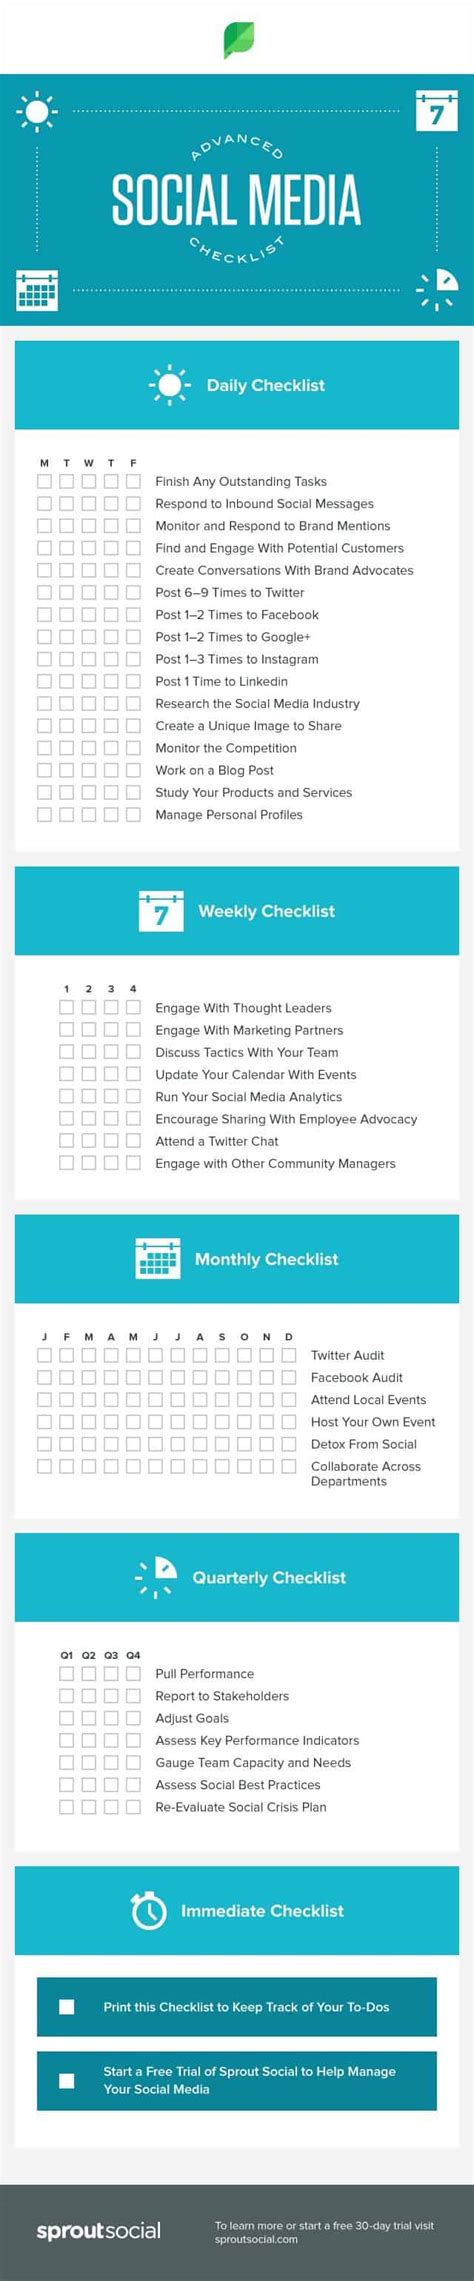 A Daily Weekly And Monthly Checklist To Improve Your Social Media Strategy